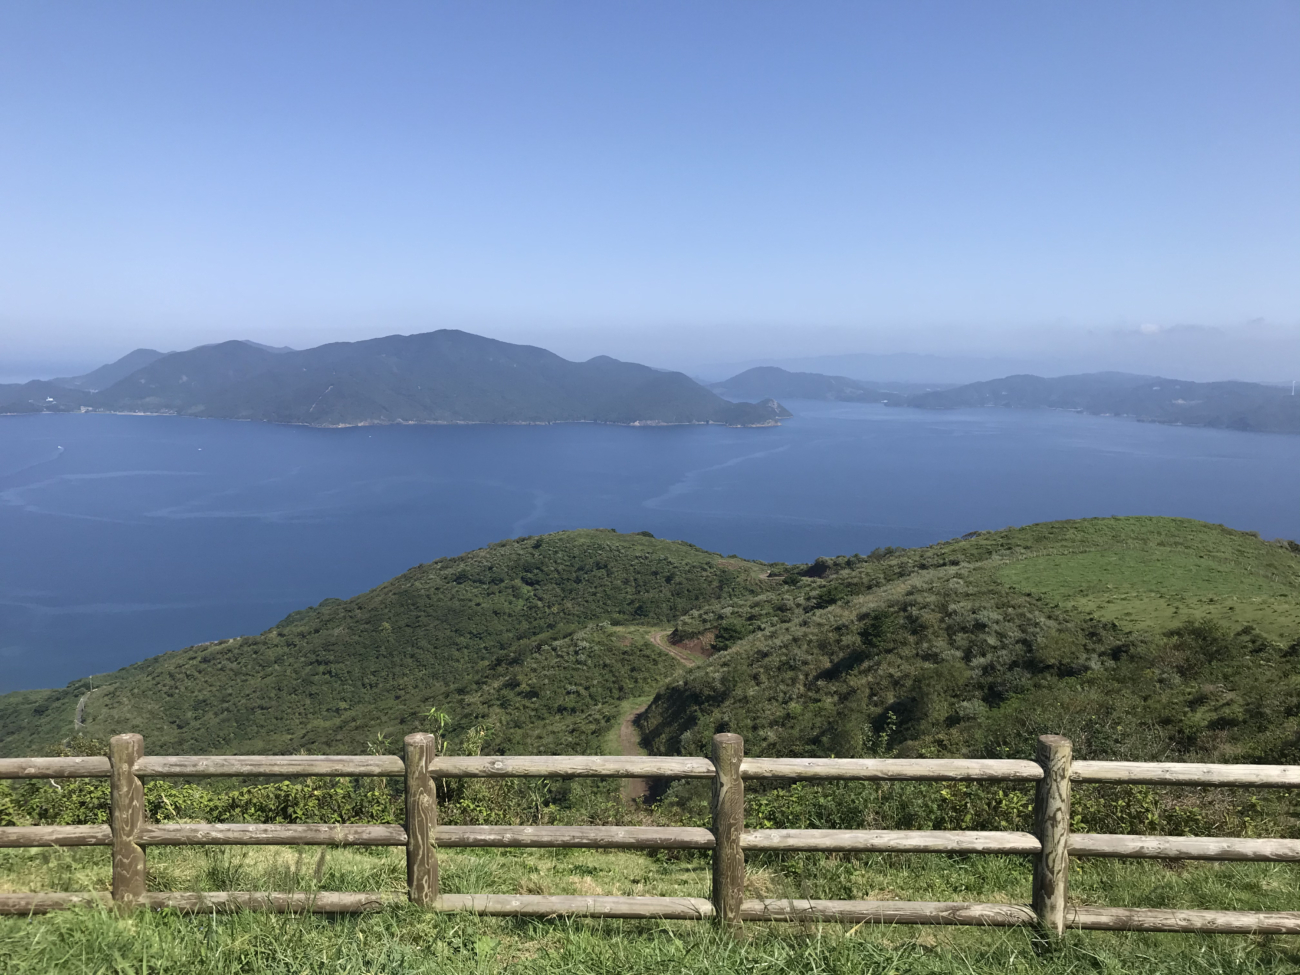 It’s summer! Explore and enjoy Oki Islands’ nature and delicacies